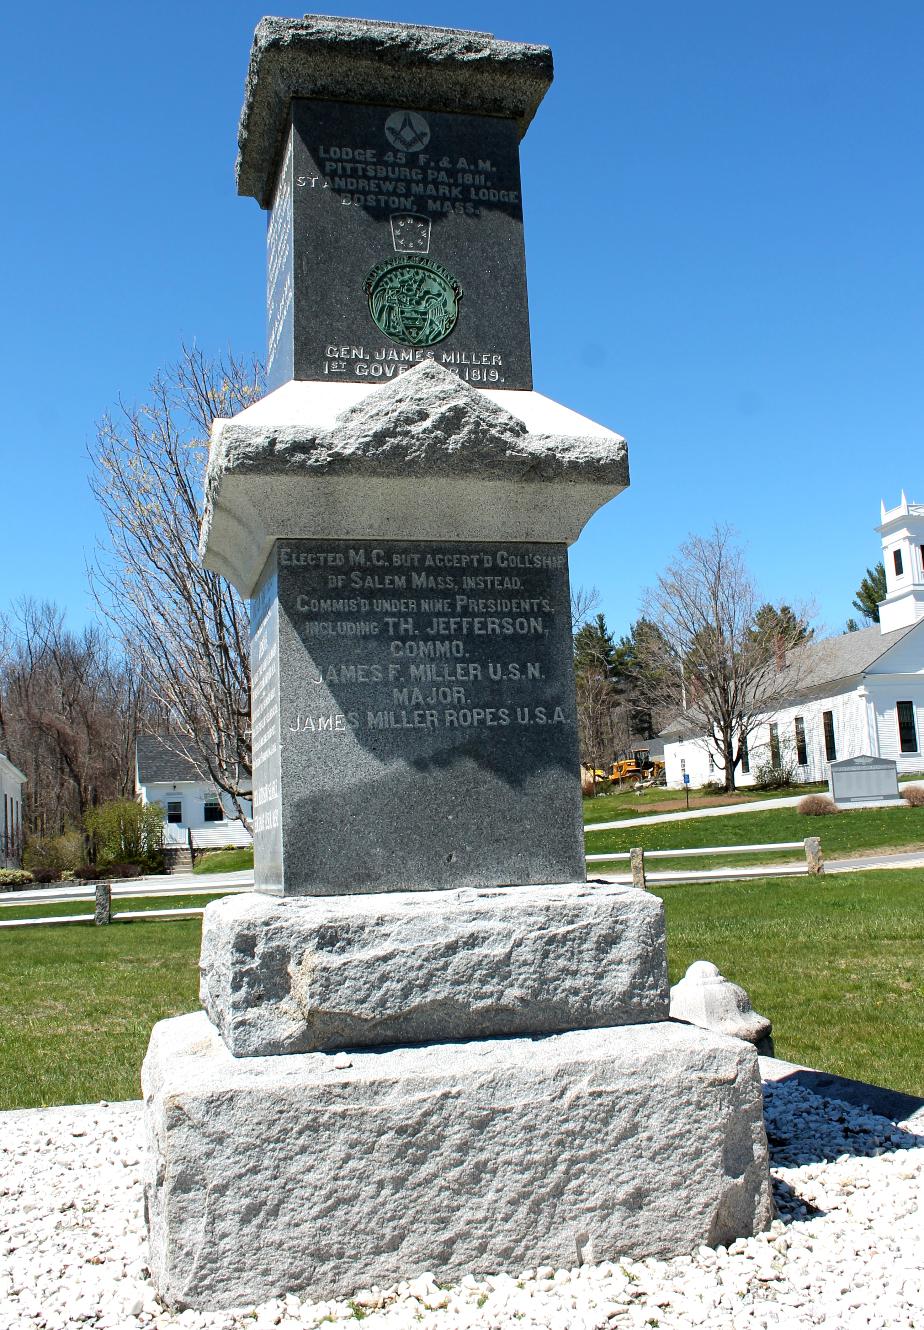 General James Miller Monument - Temple NH